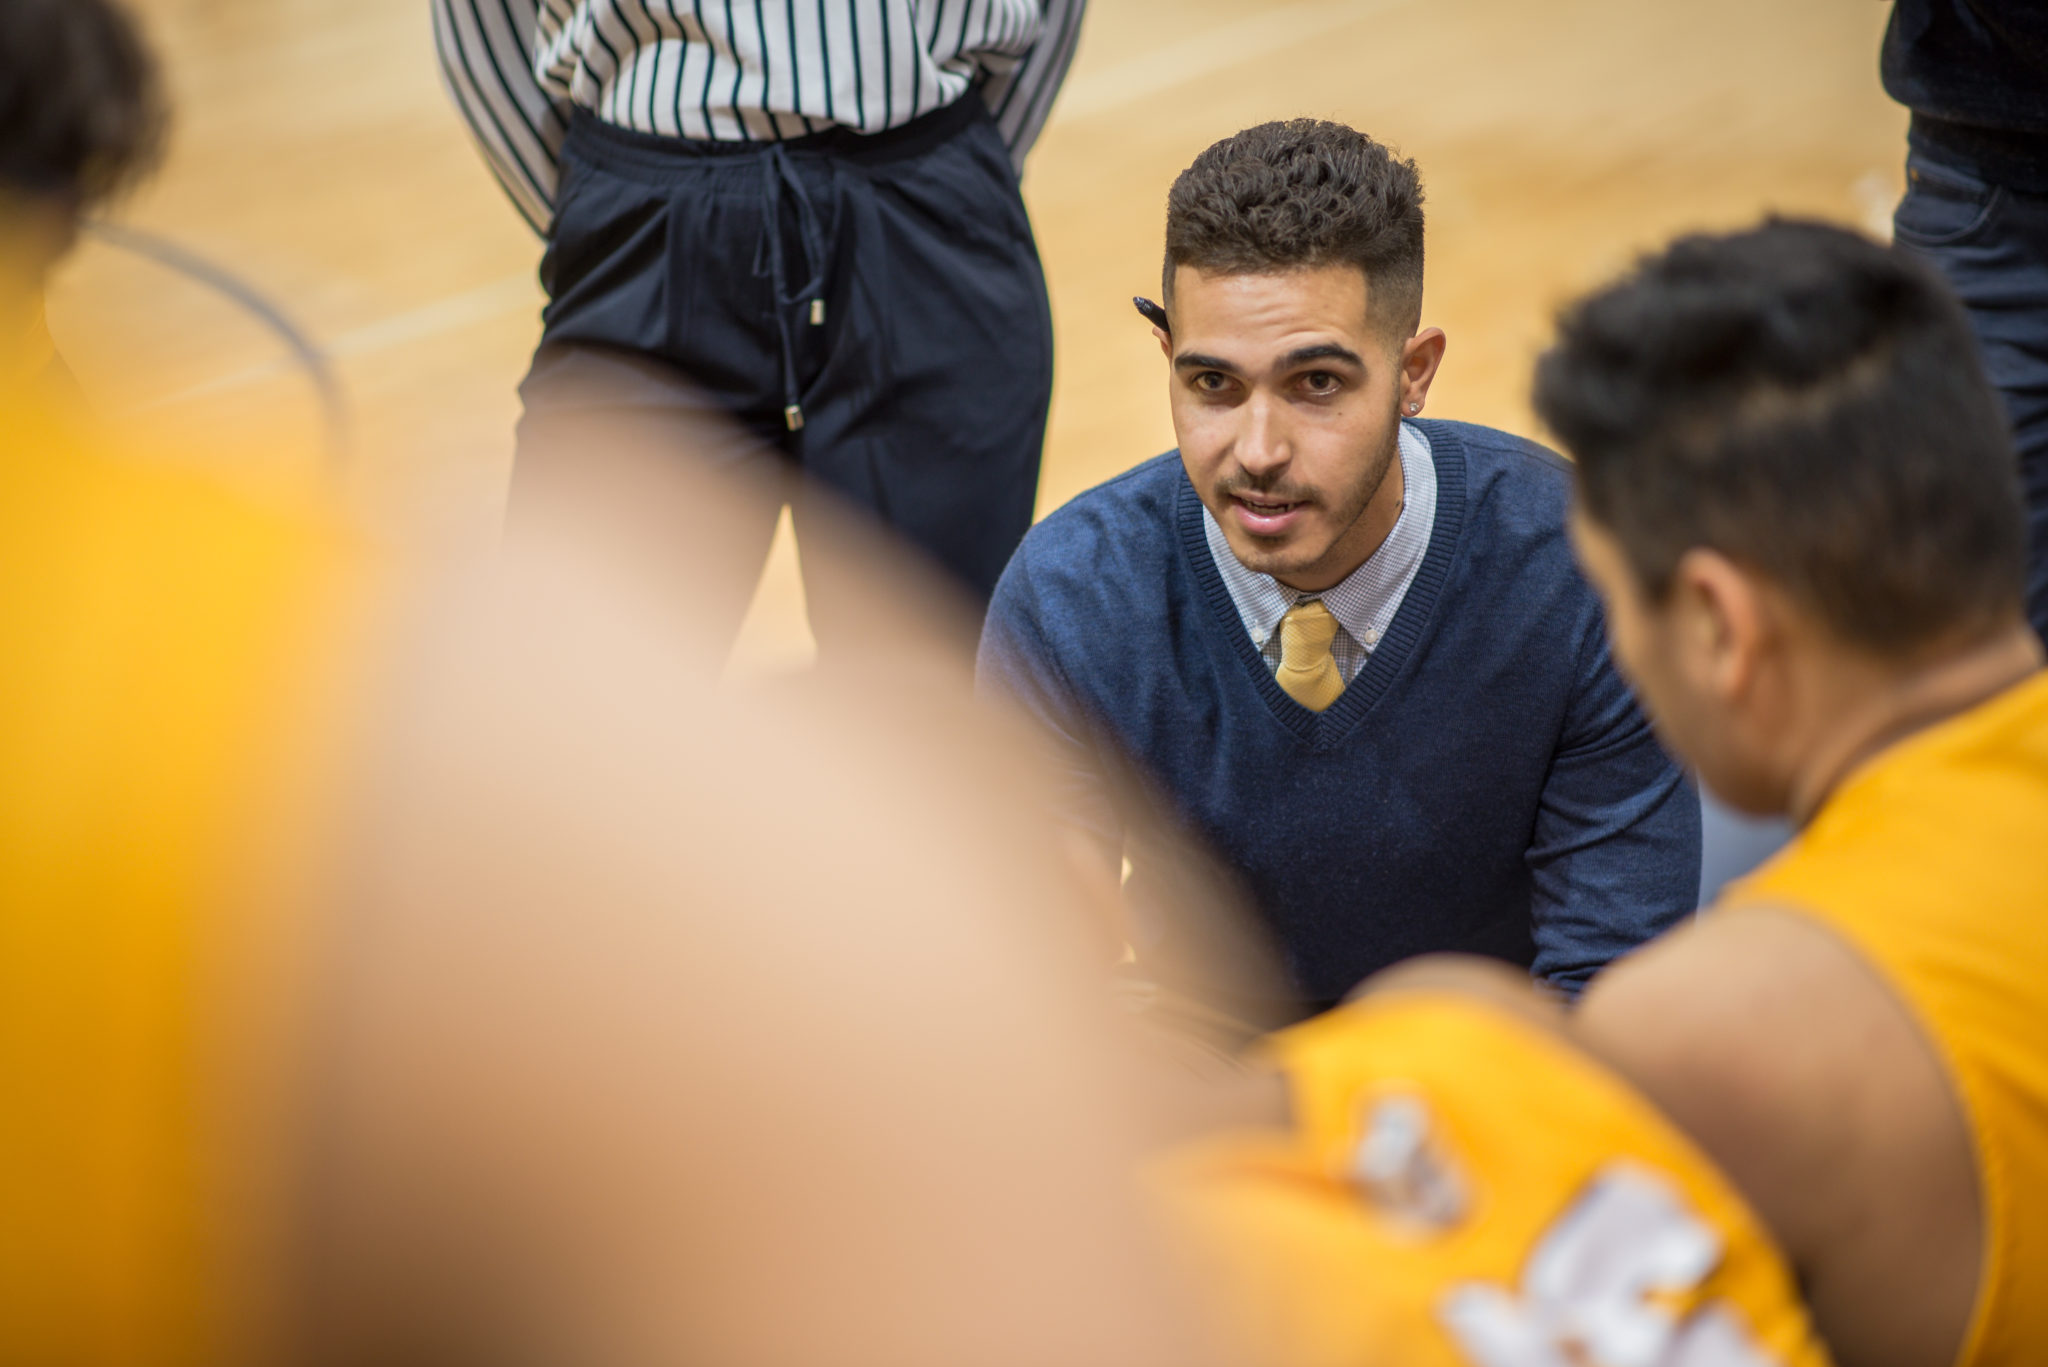 A coach in a huddle with a team of students on a gym floor